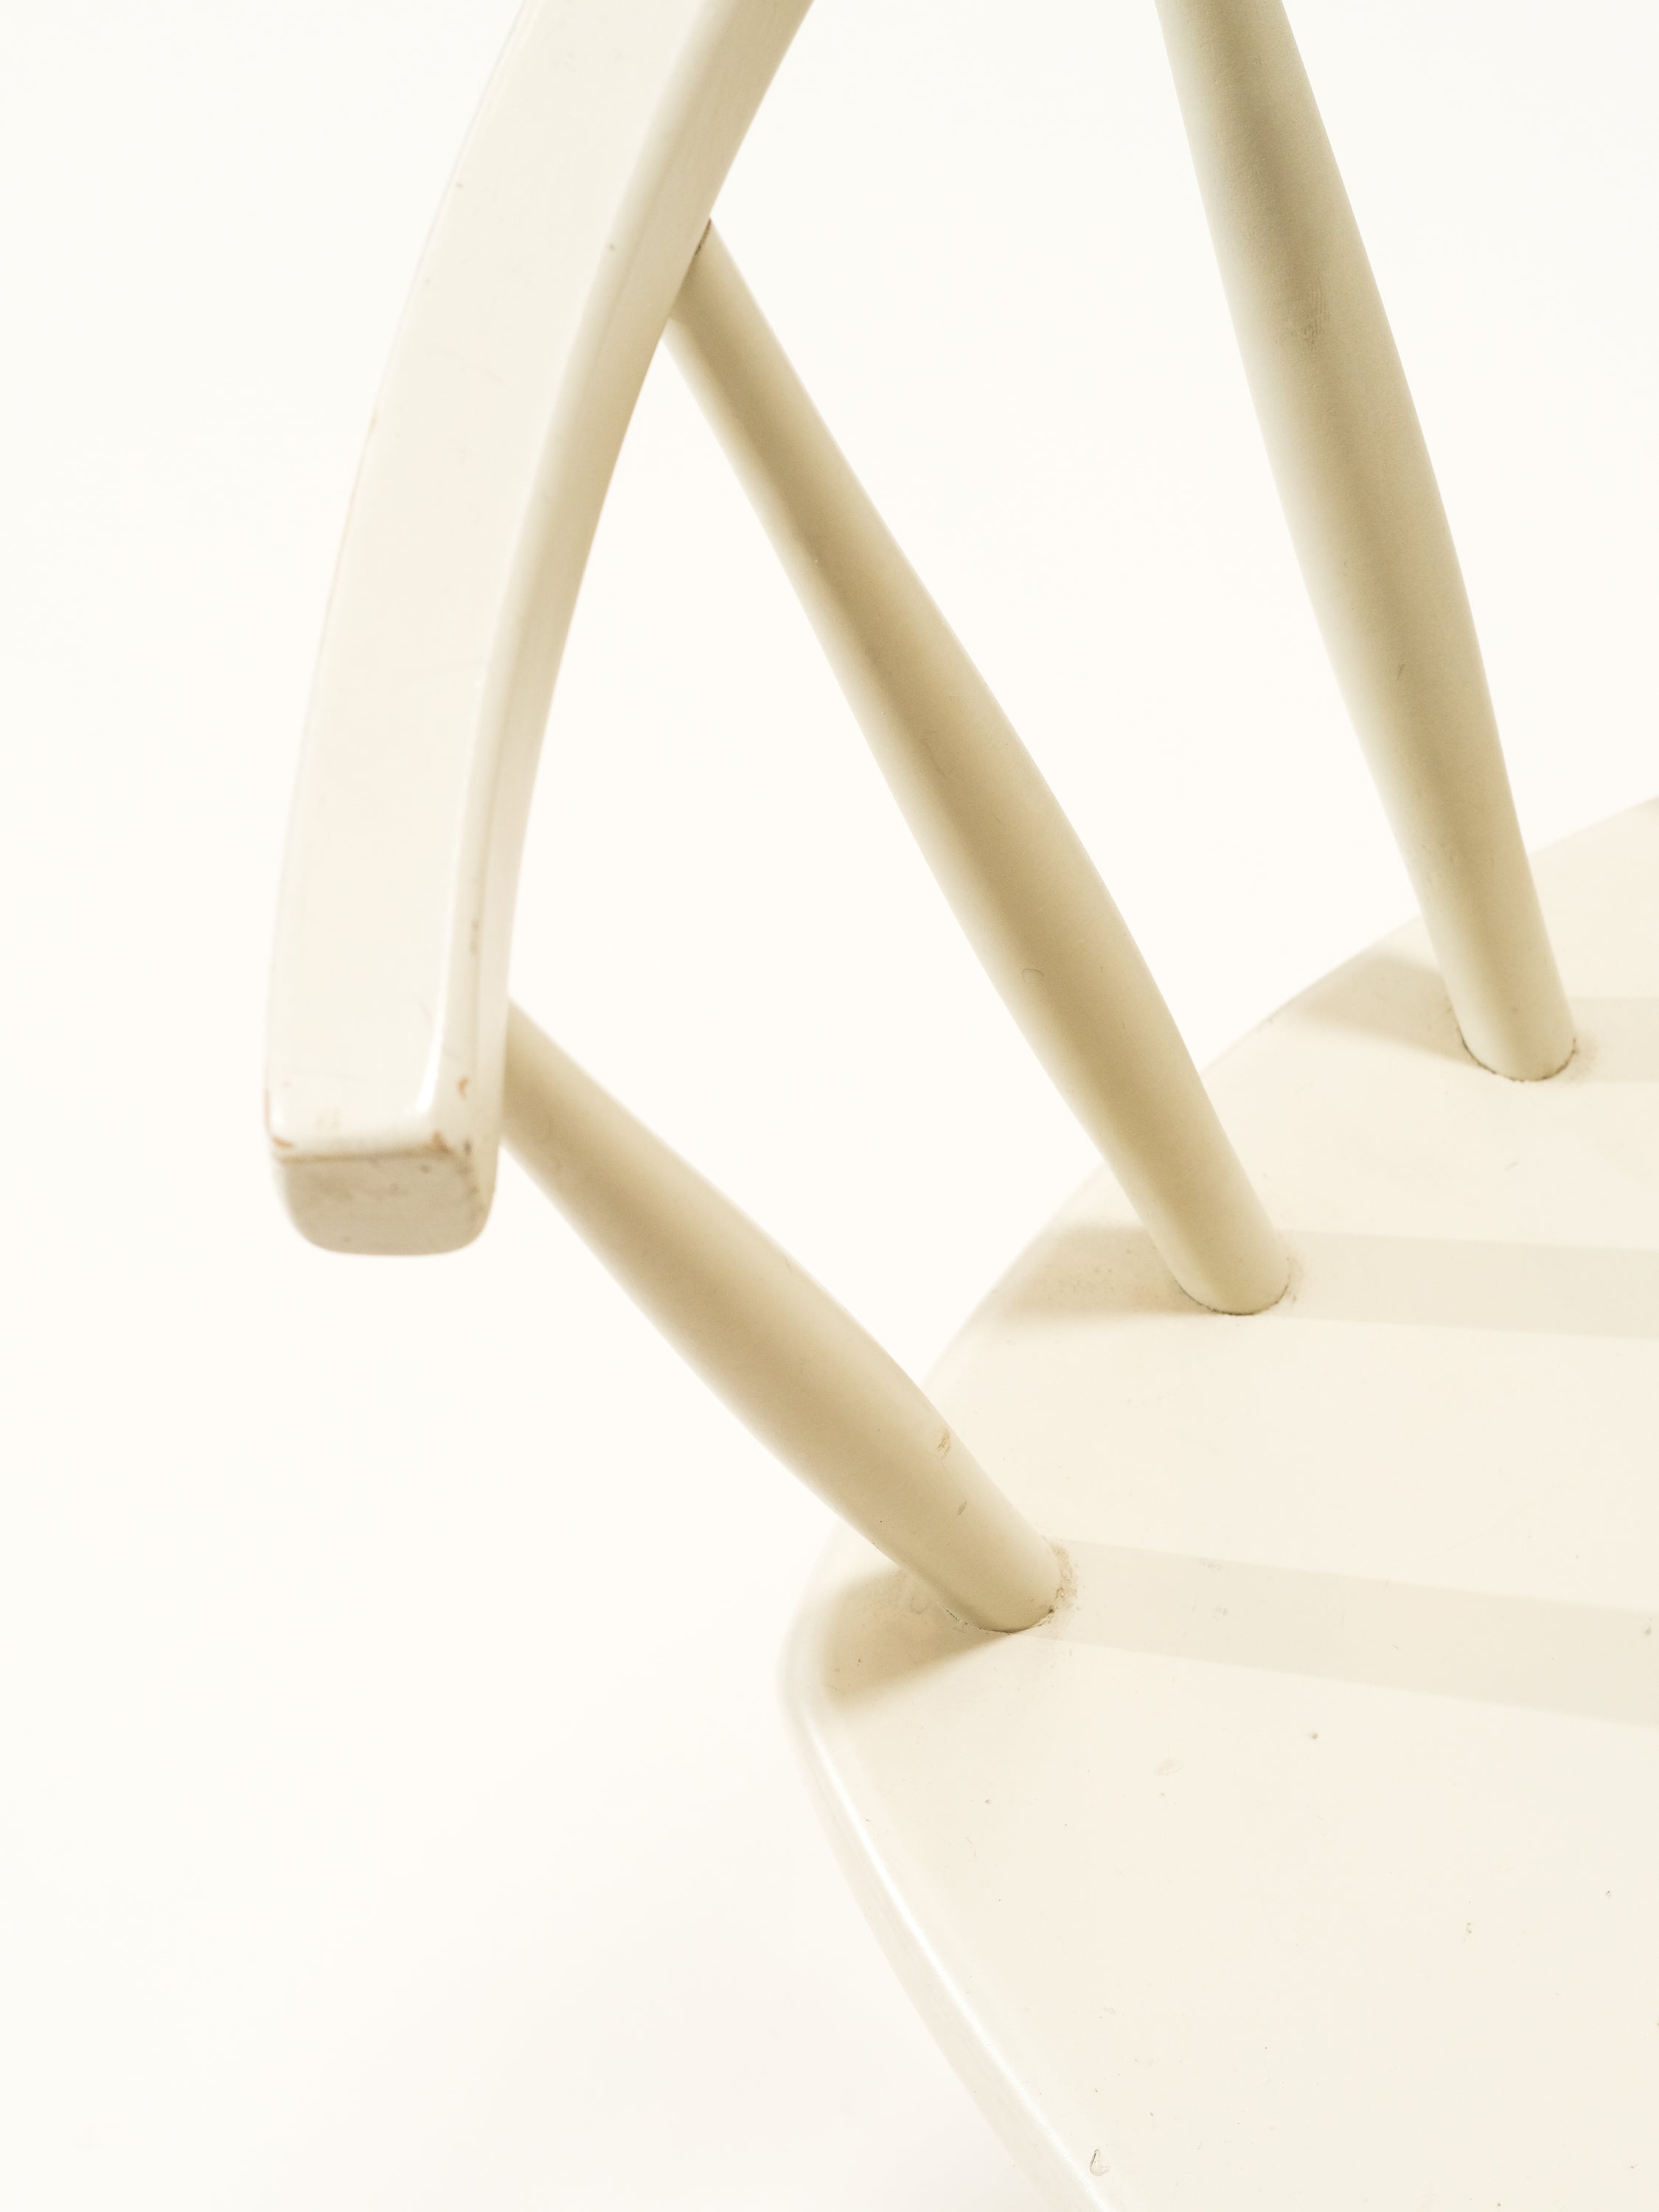 White 'Arka' Chair by Yngve Ekström for Stolab, 1950s